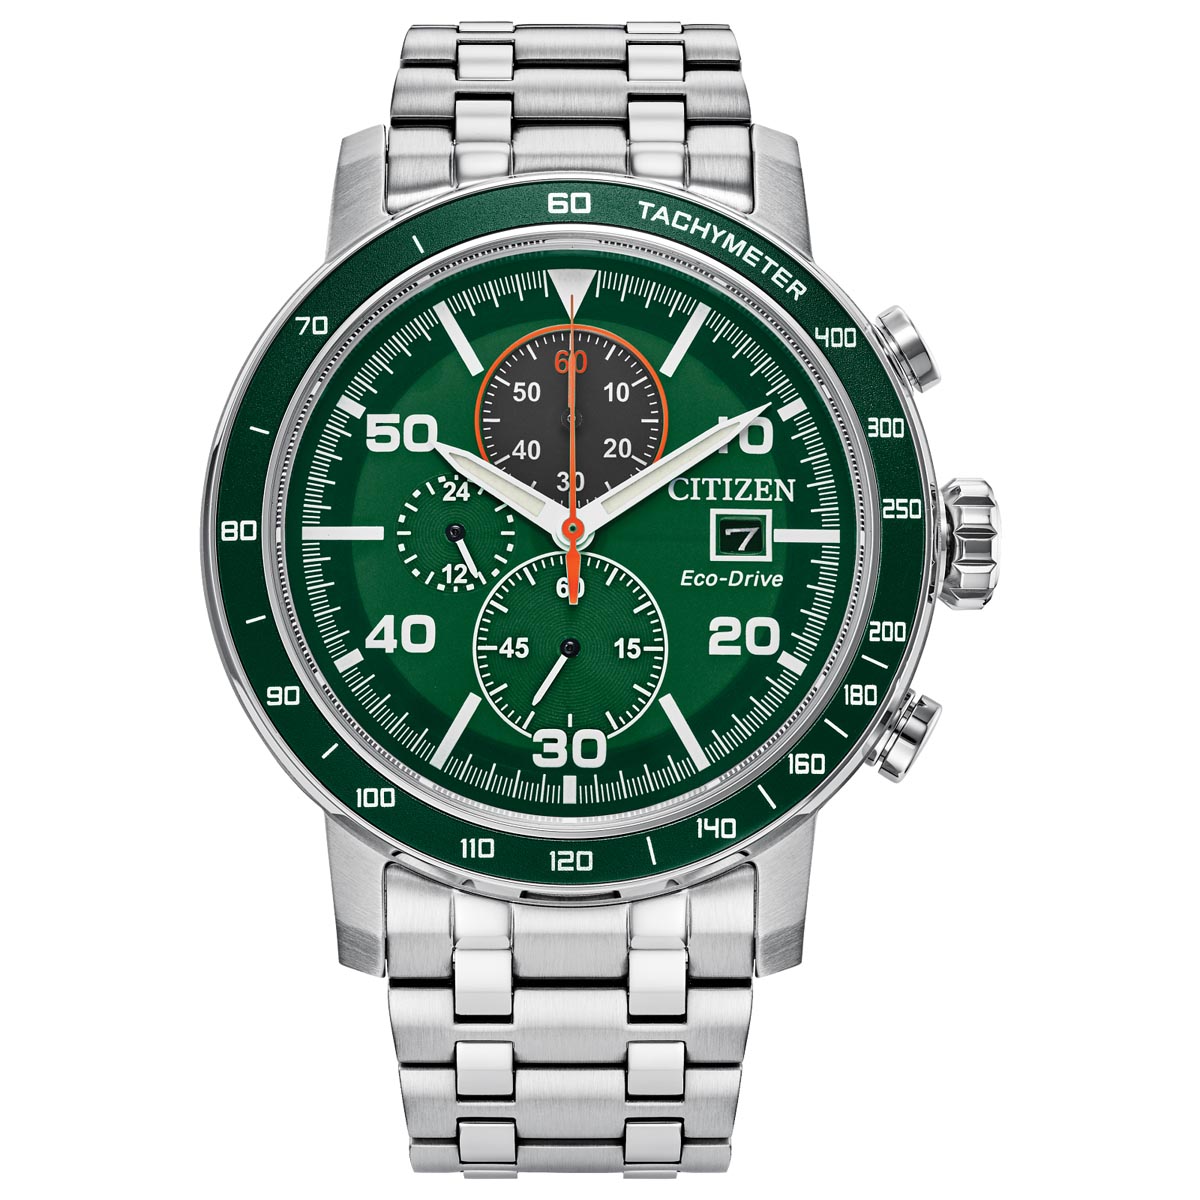 Citizen Brycen Mens Watch with Green Dial and Stainless Steel Bracelet (eco drive movement)